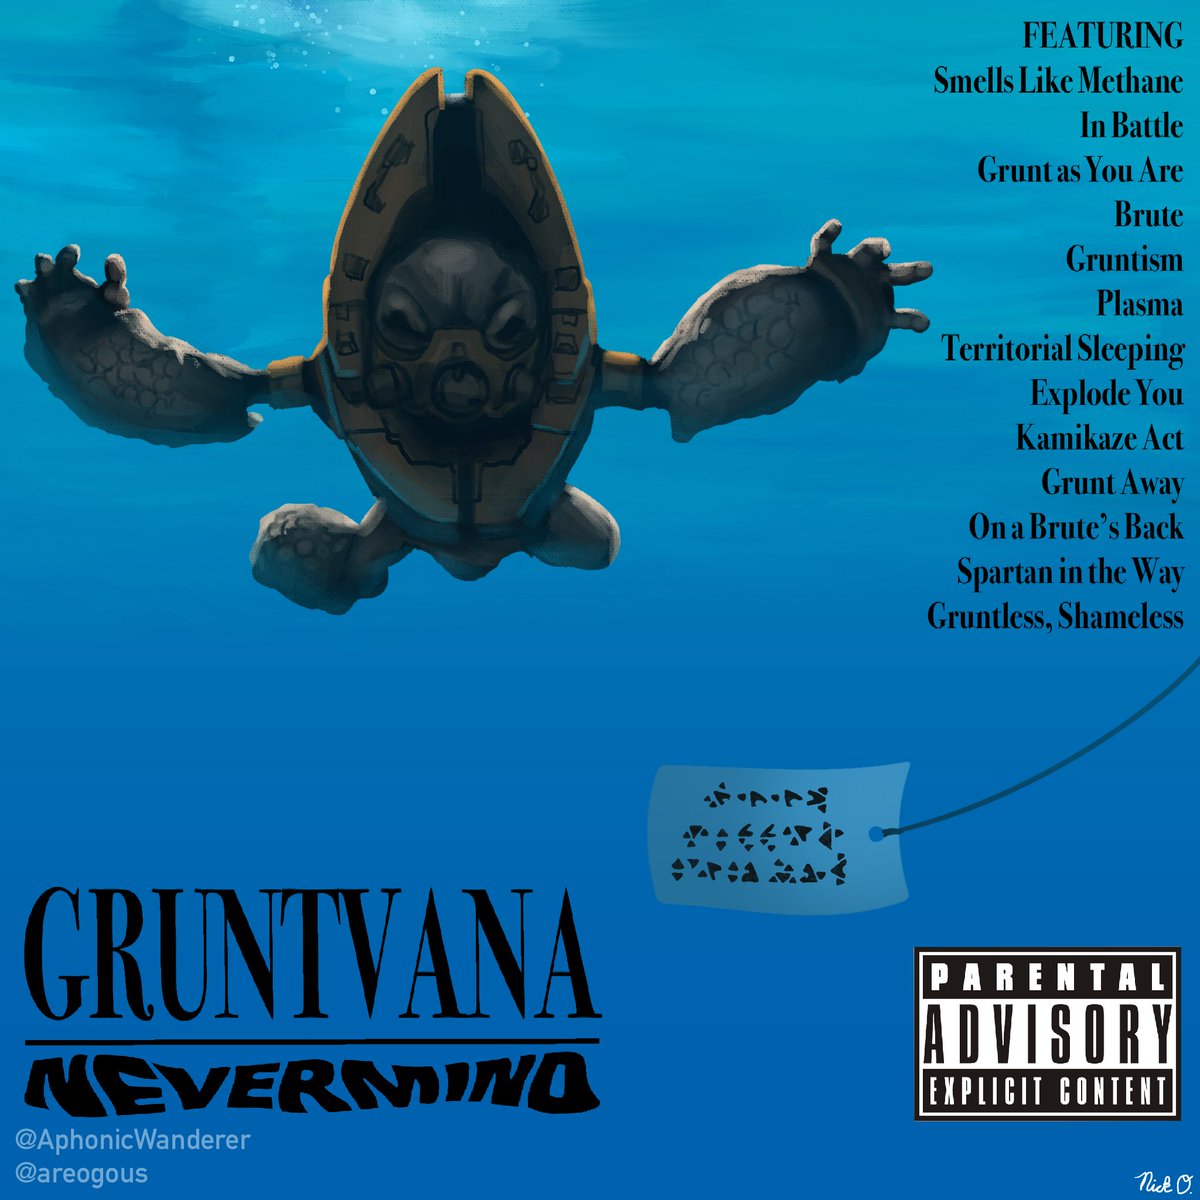 Gruntvana!
-
Inspired by some Dall-E images I saw, I made an official unofficial remake of a Nirvana album! Took me 4 hours. Super happy with it and loved making it! #HaloSpotlight #HaloInfinite #Halo #HaloTheSeries #HaloLoneWolves